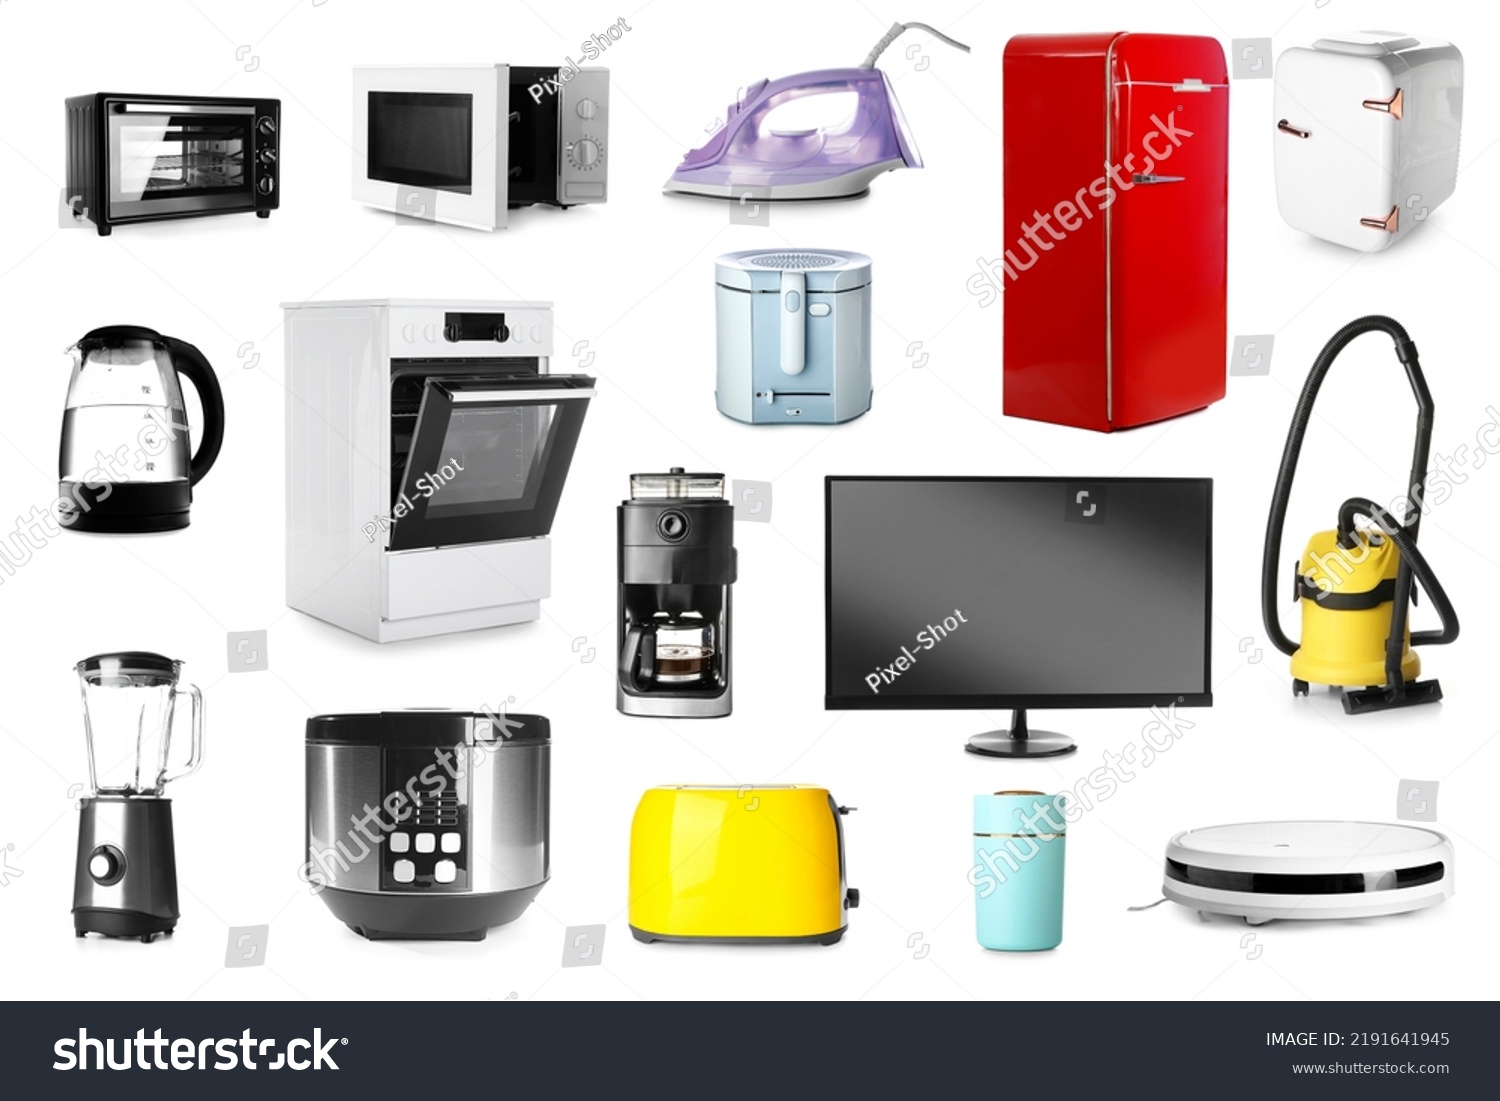 Stock Photo Set Of Different Household Appliances Isolated On White 2191641945 